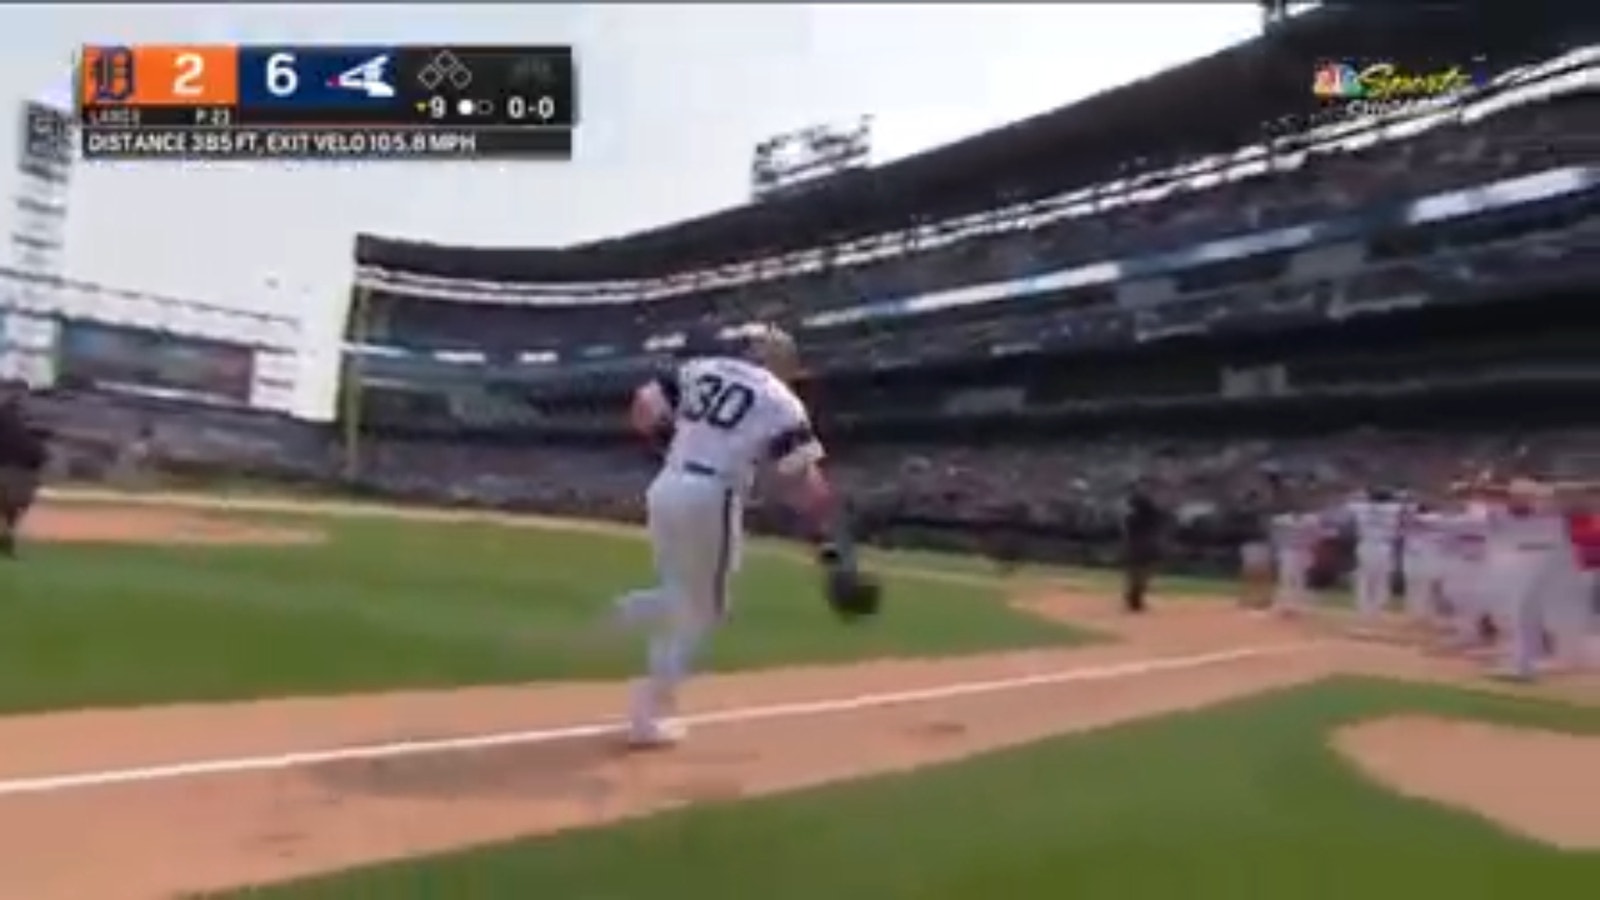 White Sox's Jake Burger hits a WALK-OFF GRAND SLAM to defeat the Tigers